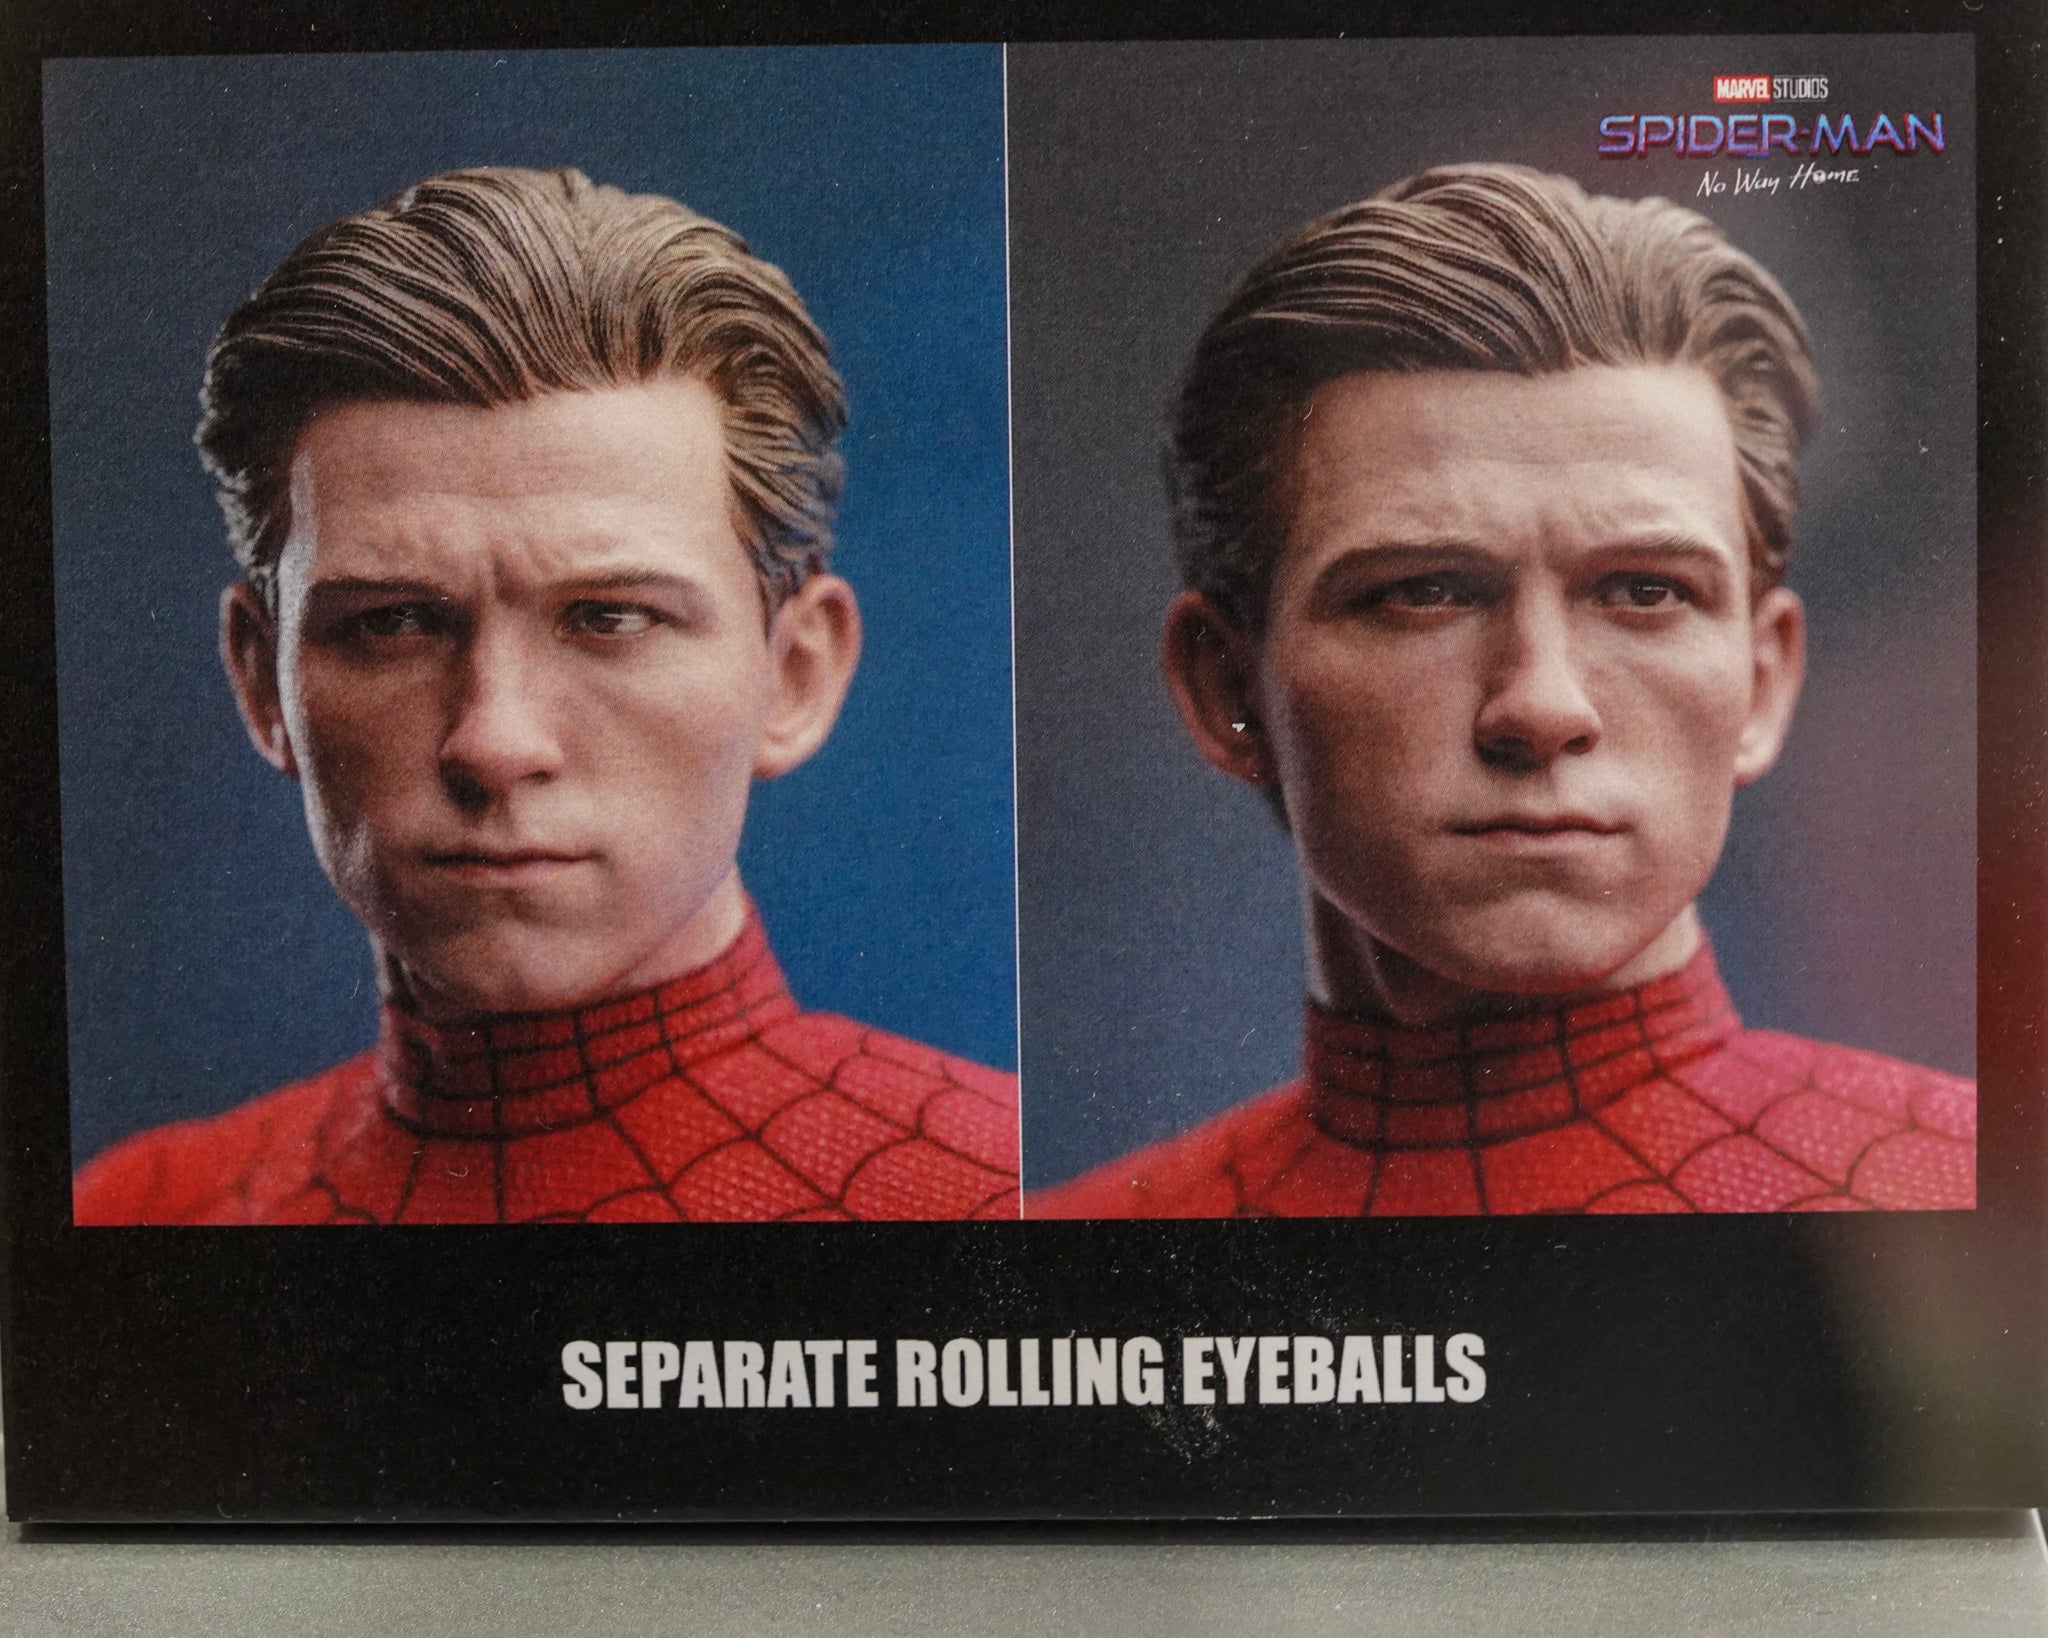 Figurine Hot Toys Spider-Man New Red and Blue Suit Deluxe Version